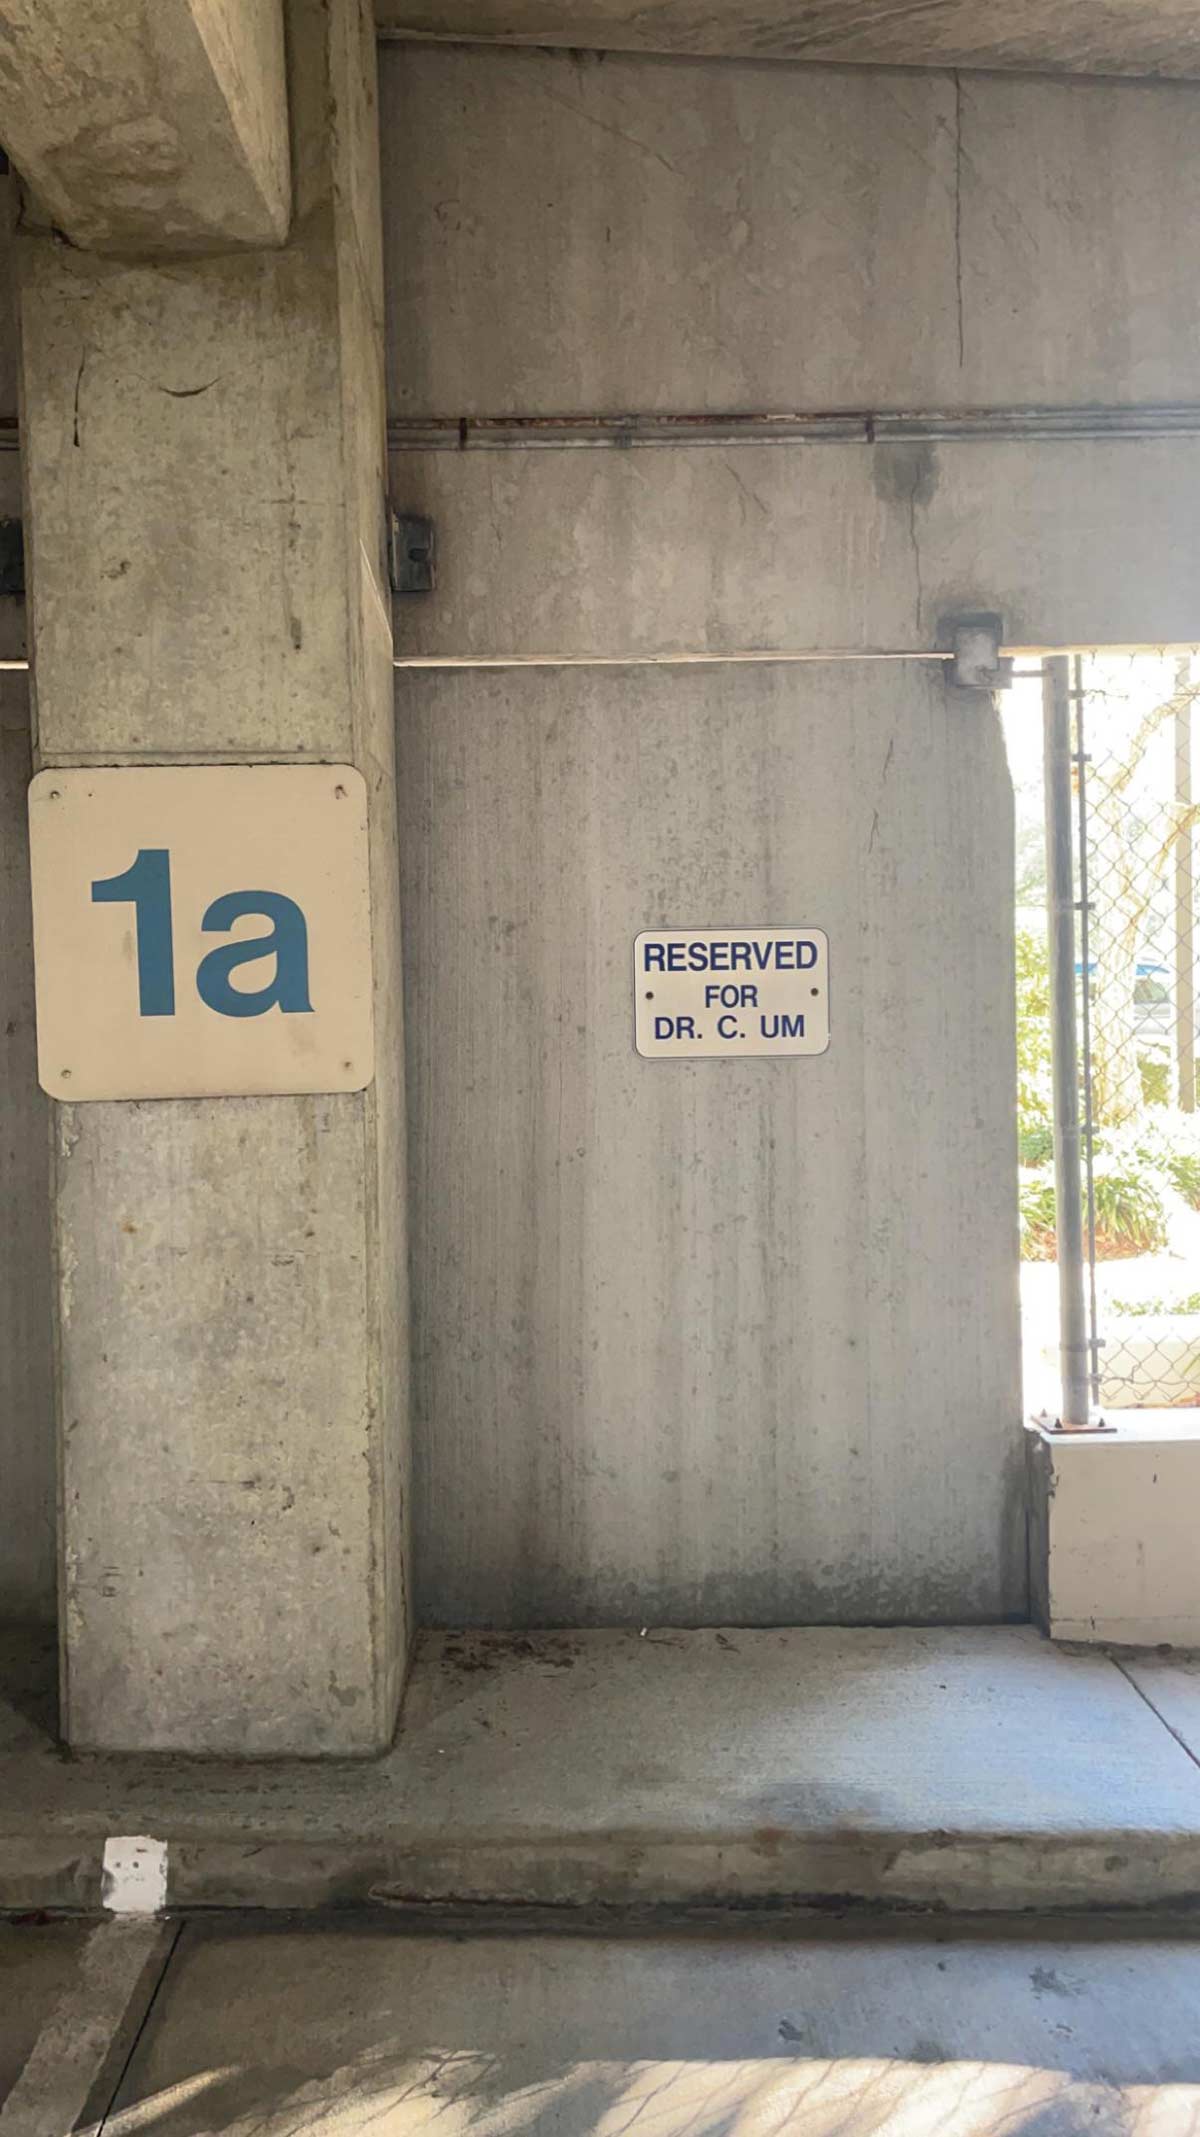 Spotted this sign leaving the parking garage of my local gynecologist’s office and had to double take